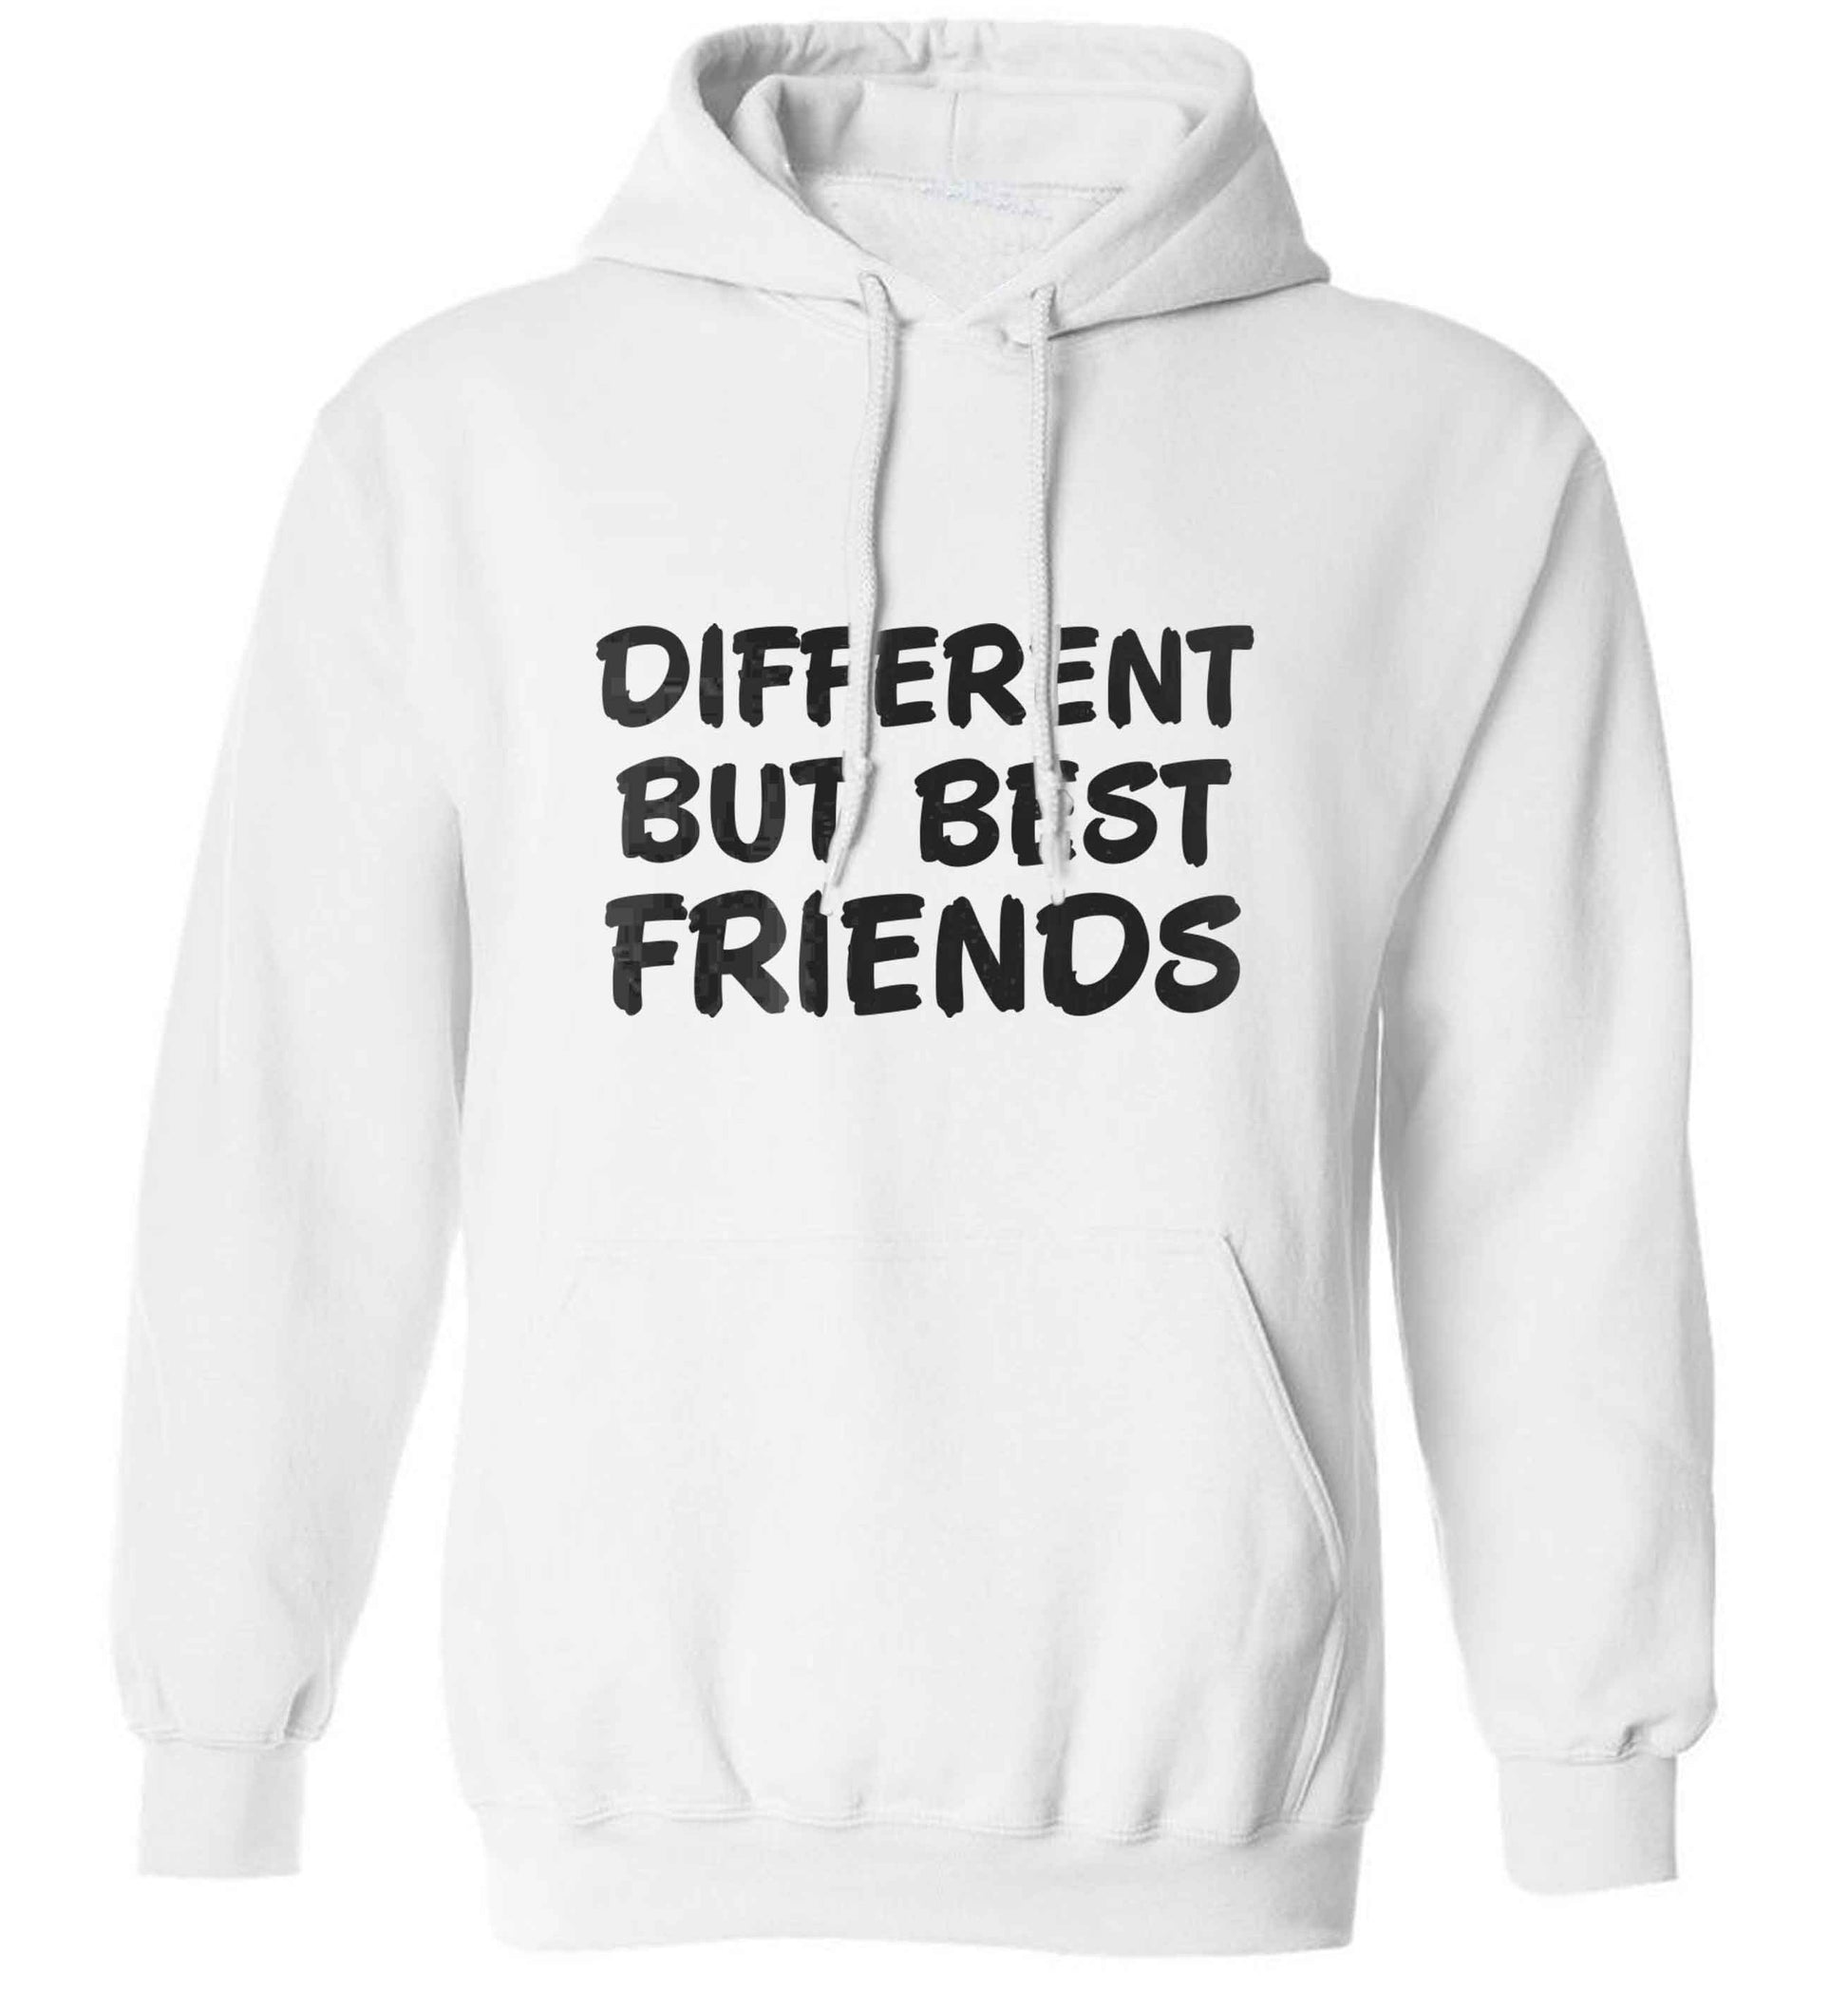 Different but best friends adults unisex white hoodie 2XL